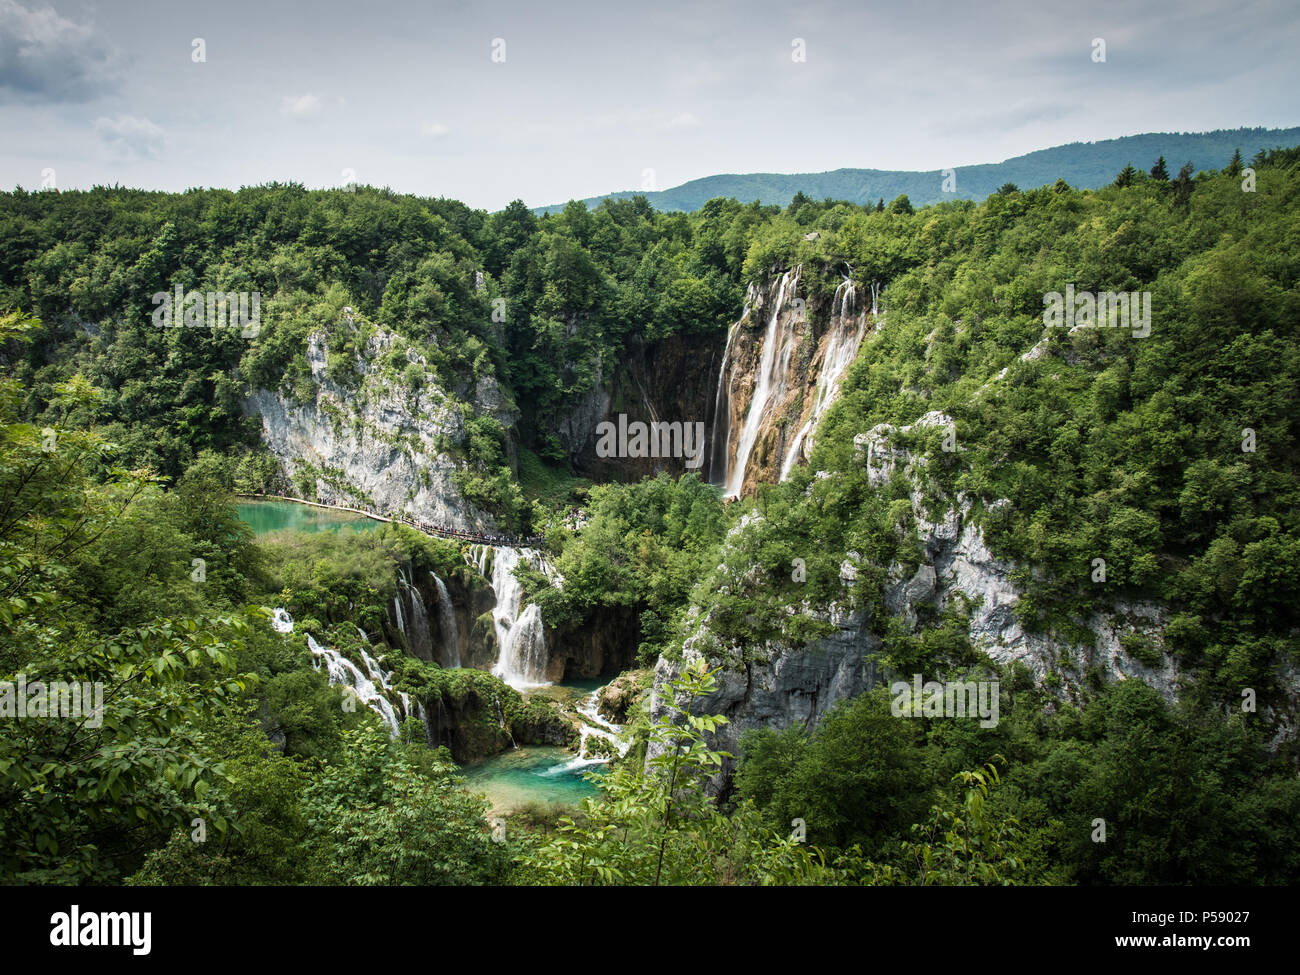 Stunning view of the waterfalls and lakes of Plitvice National Park in Croatia. Mother nature's finest, one of the top travel destinations worldwide. Stock Photo